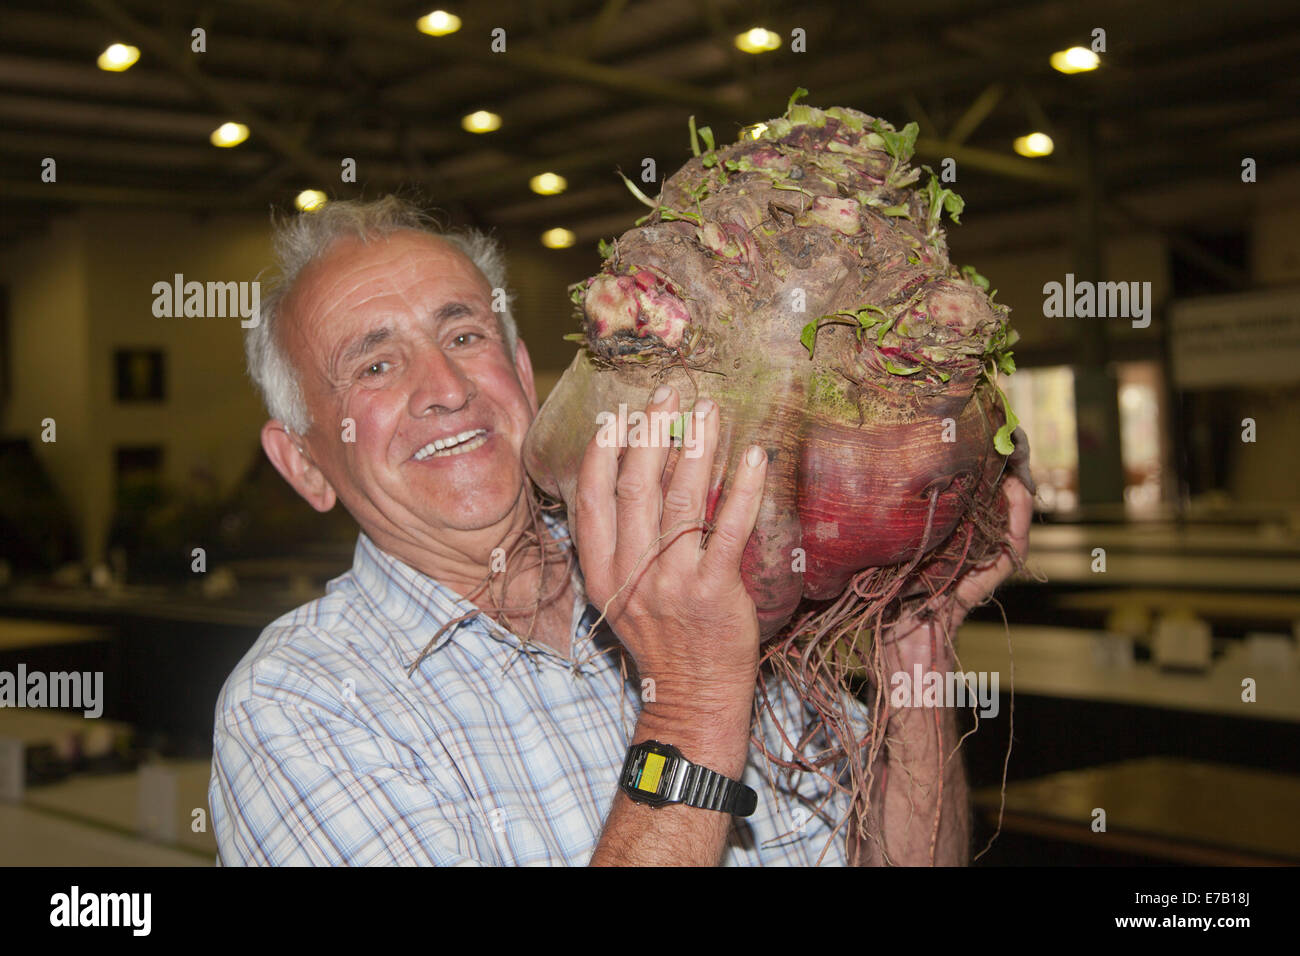 Harrogate, Yorkshire, UK. 11th Sept, 2014.  Ian Neale with Giant Vegetable, a beetroot weighing 28lbs 4ozs. Deformed, misshapen, malformed, distorted, crooked, irregular, misproportioned, ill-proportioned, ill-shaped, ugly veg at the Annual Autumn Flower Show, attractions include the giant vegetable competition, is ranked as one of Britain's top three gardening events.  New for 2014 is Inspiration Street, a series of small gardens set against the backdrop of a traditional street scene. The Avenue will offer beautiful, larger scale gardens, plus a new Community Spirit feature with ‘messa Stock Photo